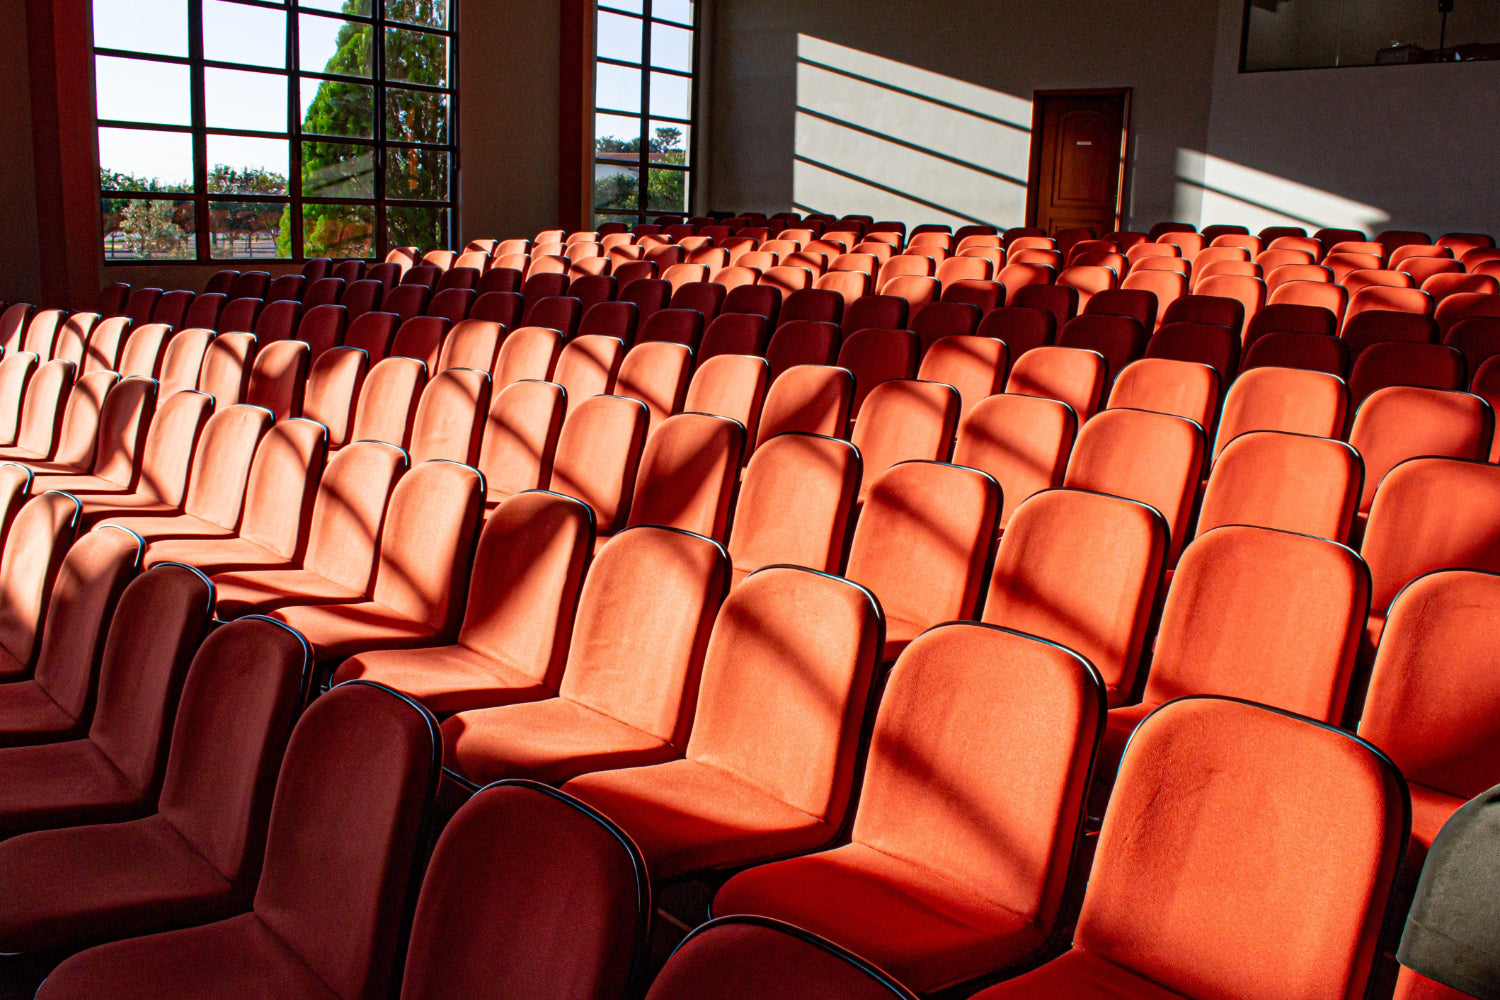 Rows of seating in a campus auditorium